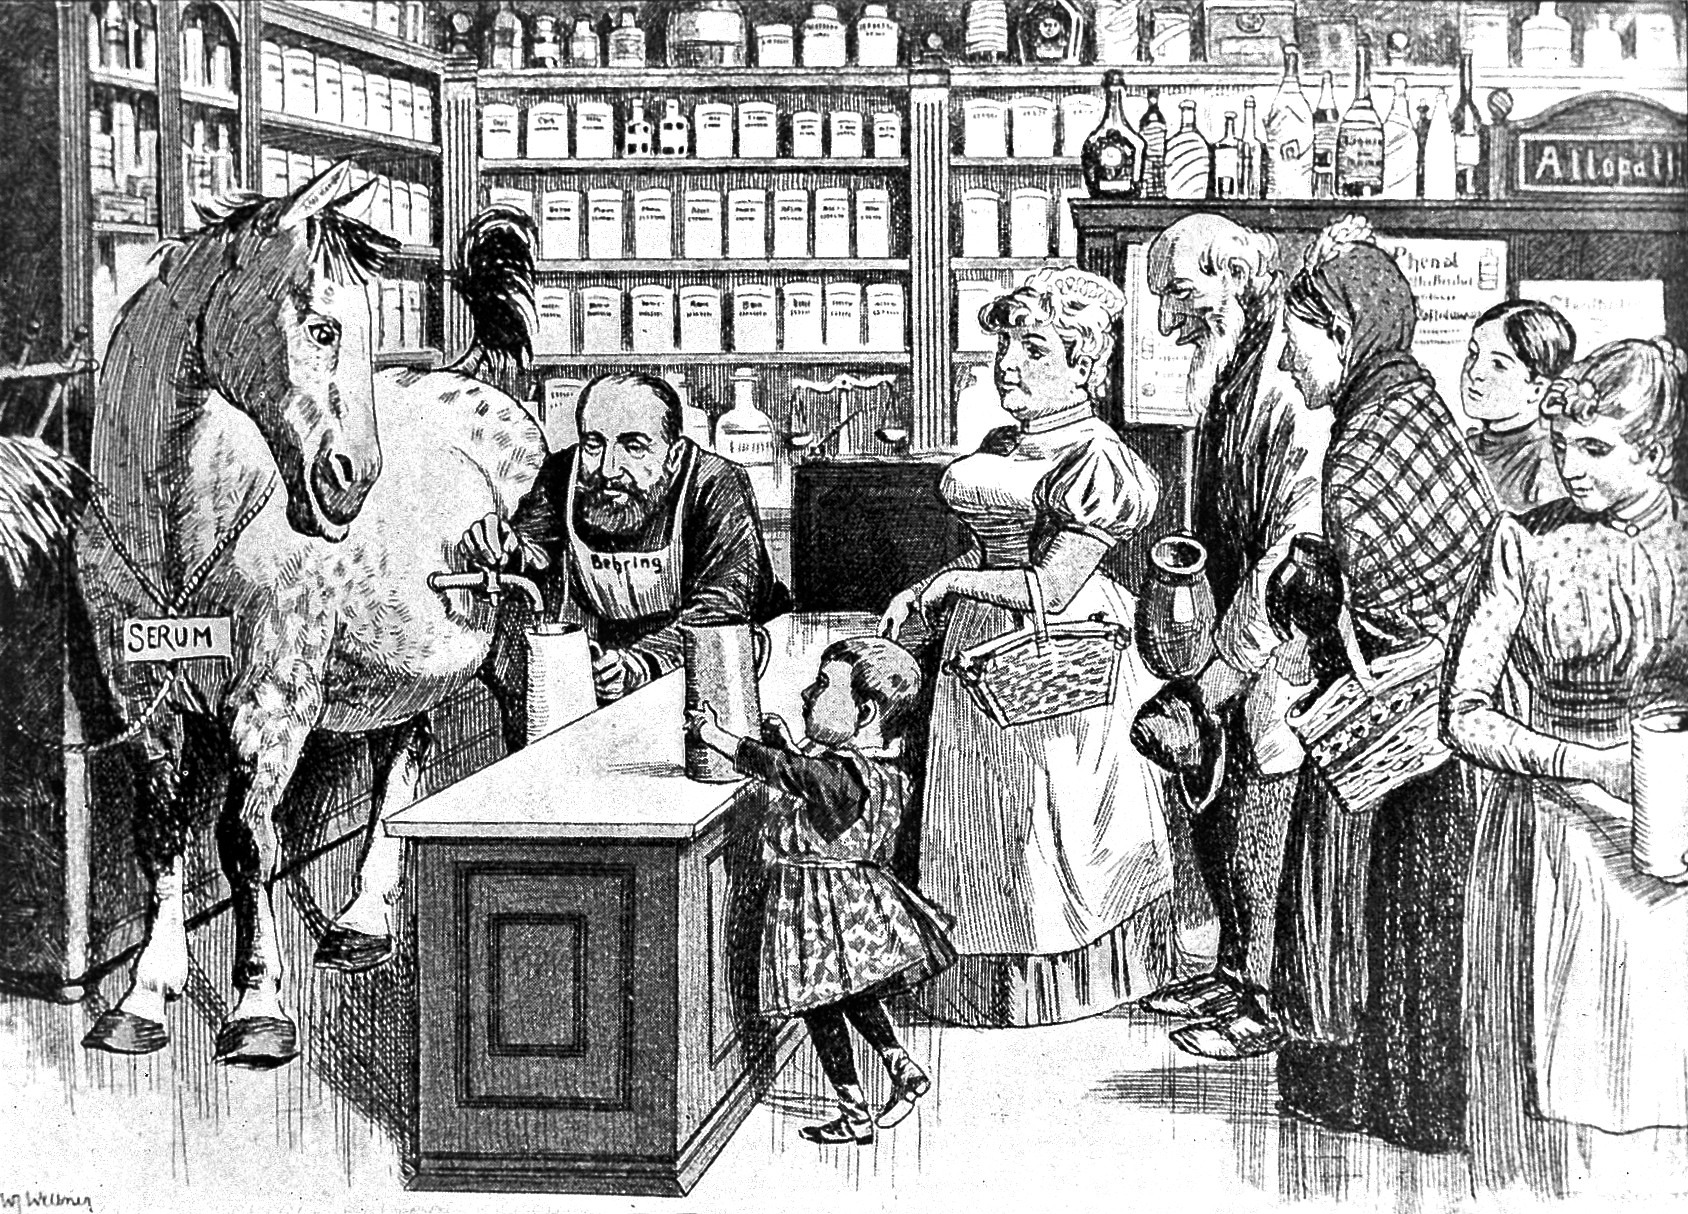 German caricature illustrating von Behring’s late 19th century experiment with diphtheria toxin and horses.